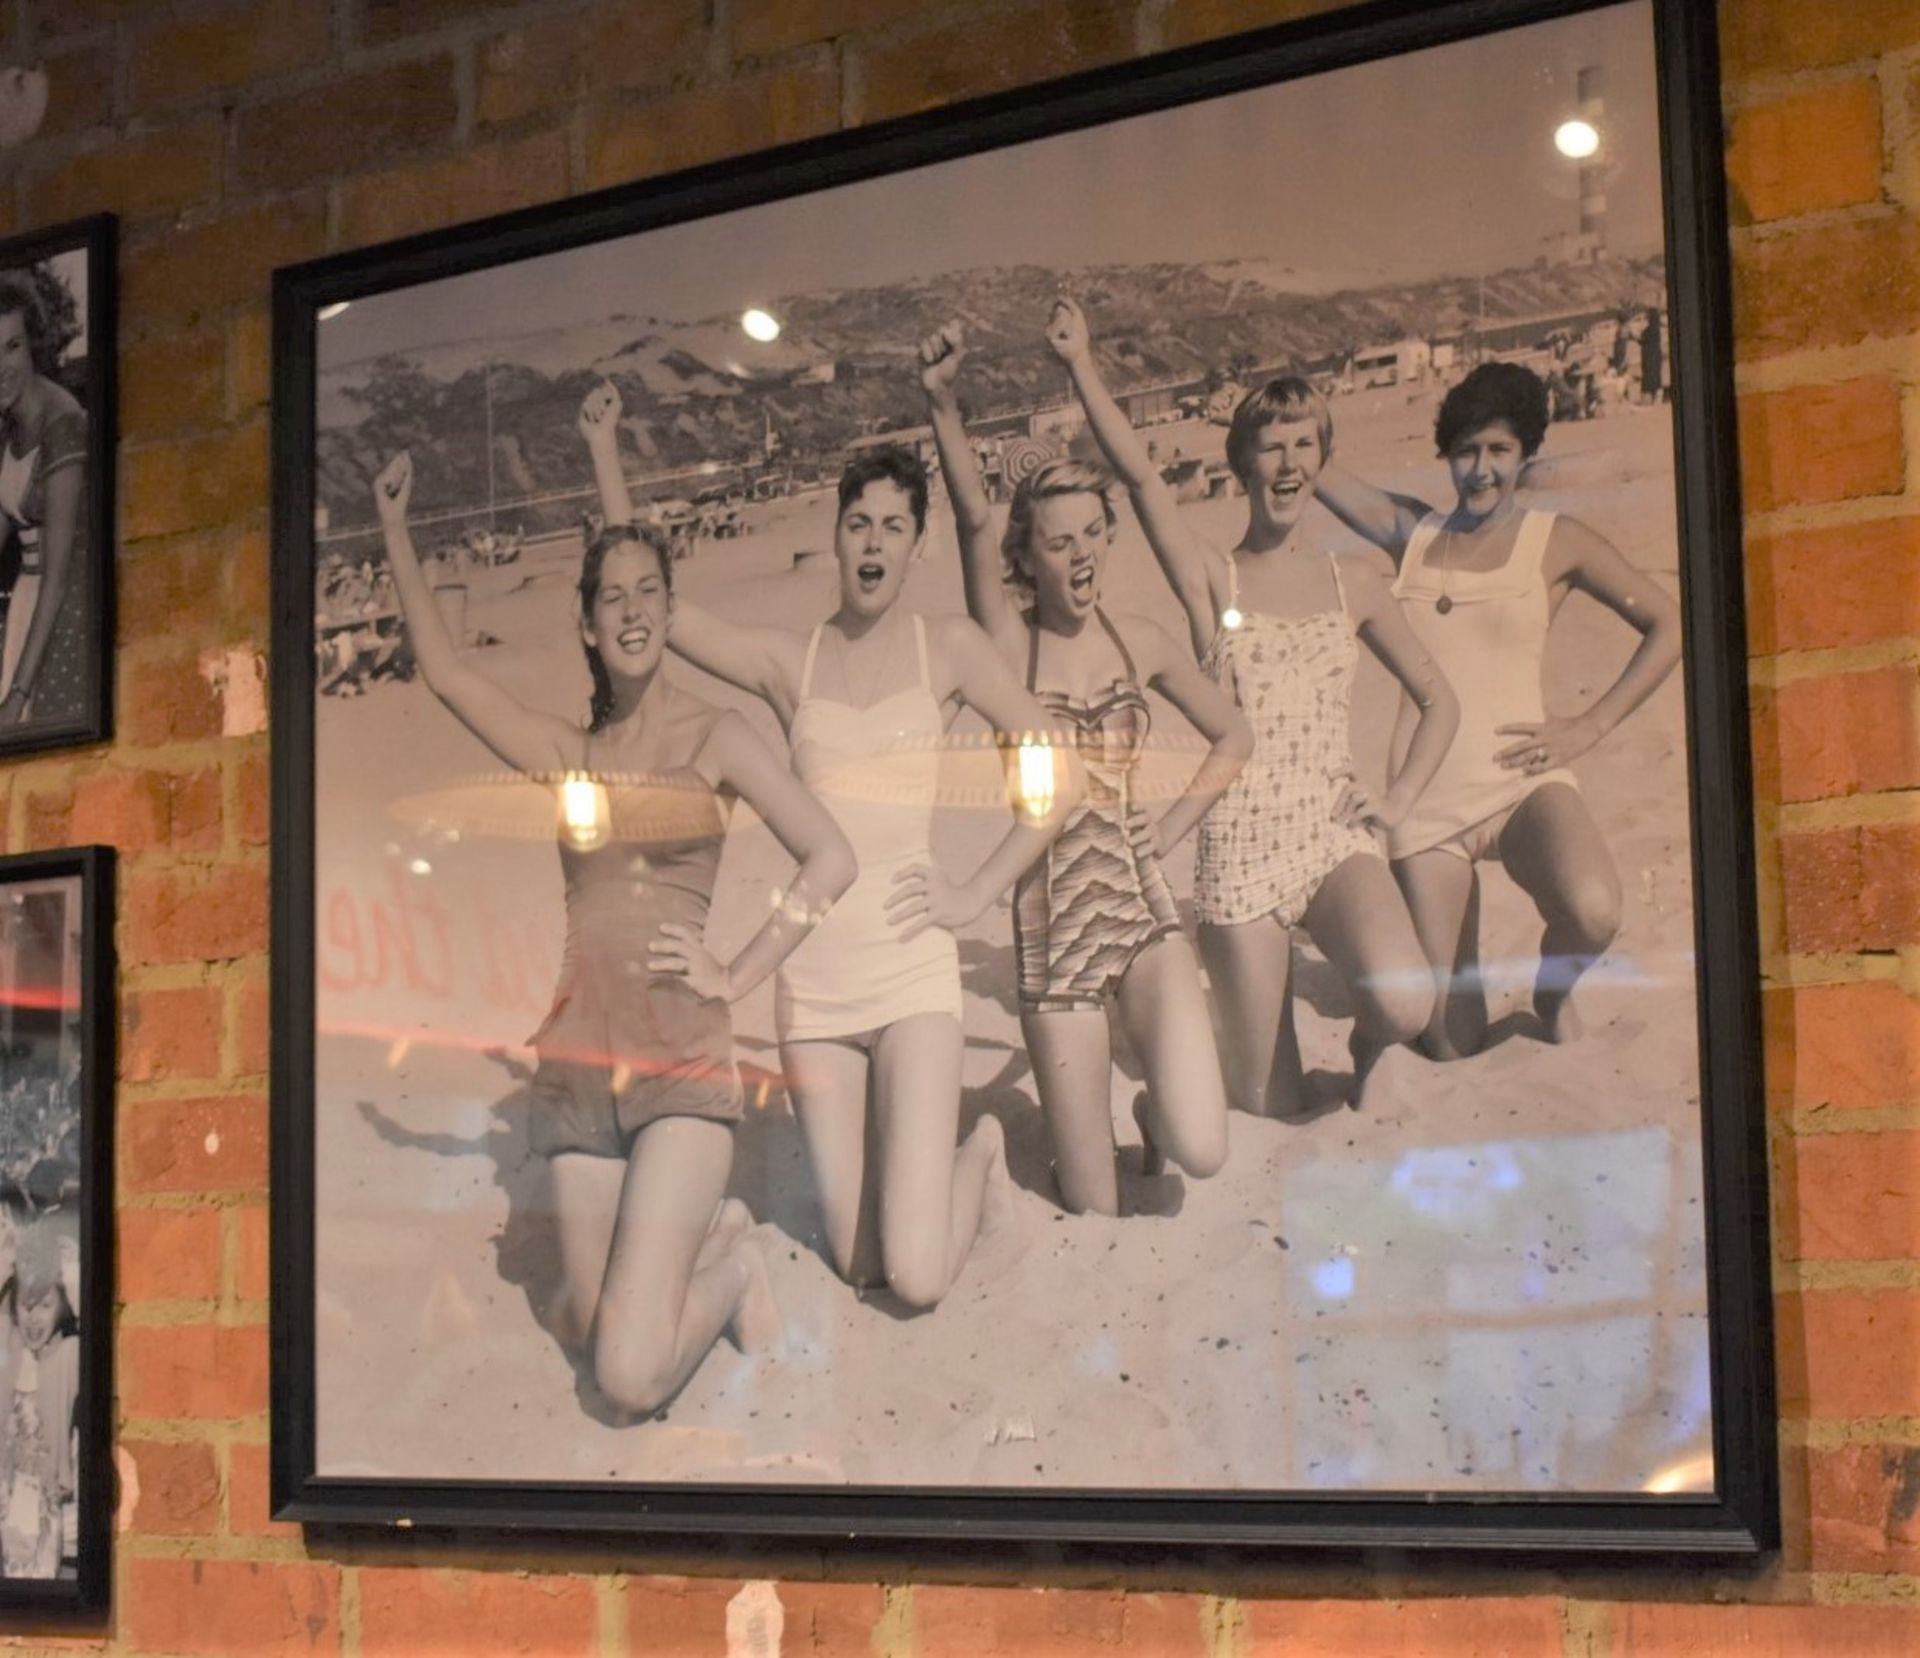 1 x Framed Picture Depicting Women on Beach - Size 107 x 85 cms - From Italian American Diner - - Image 2 of 2